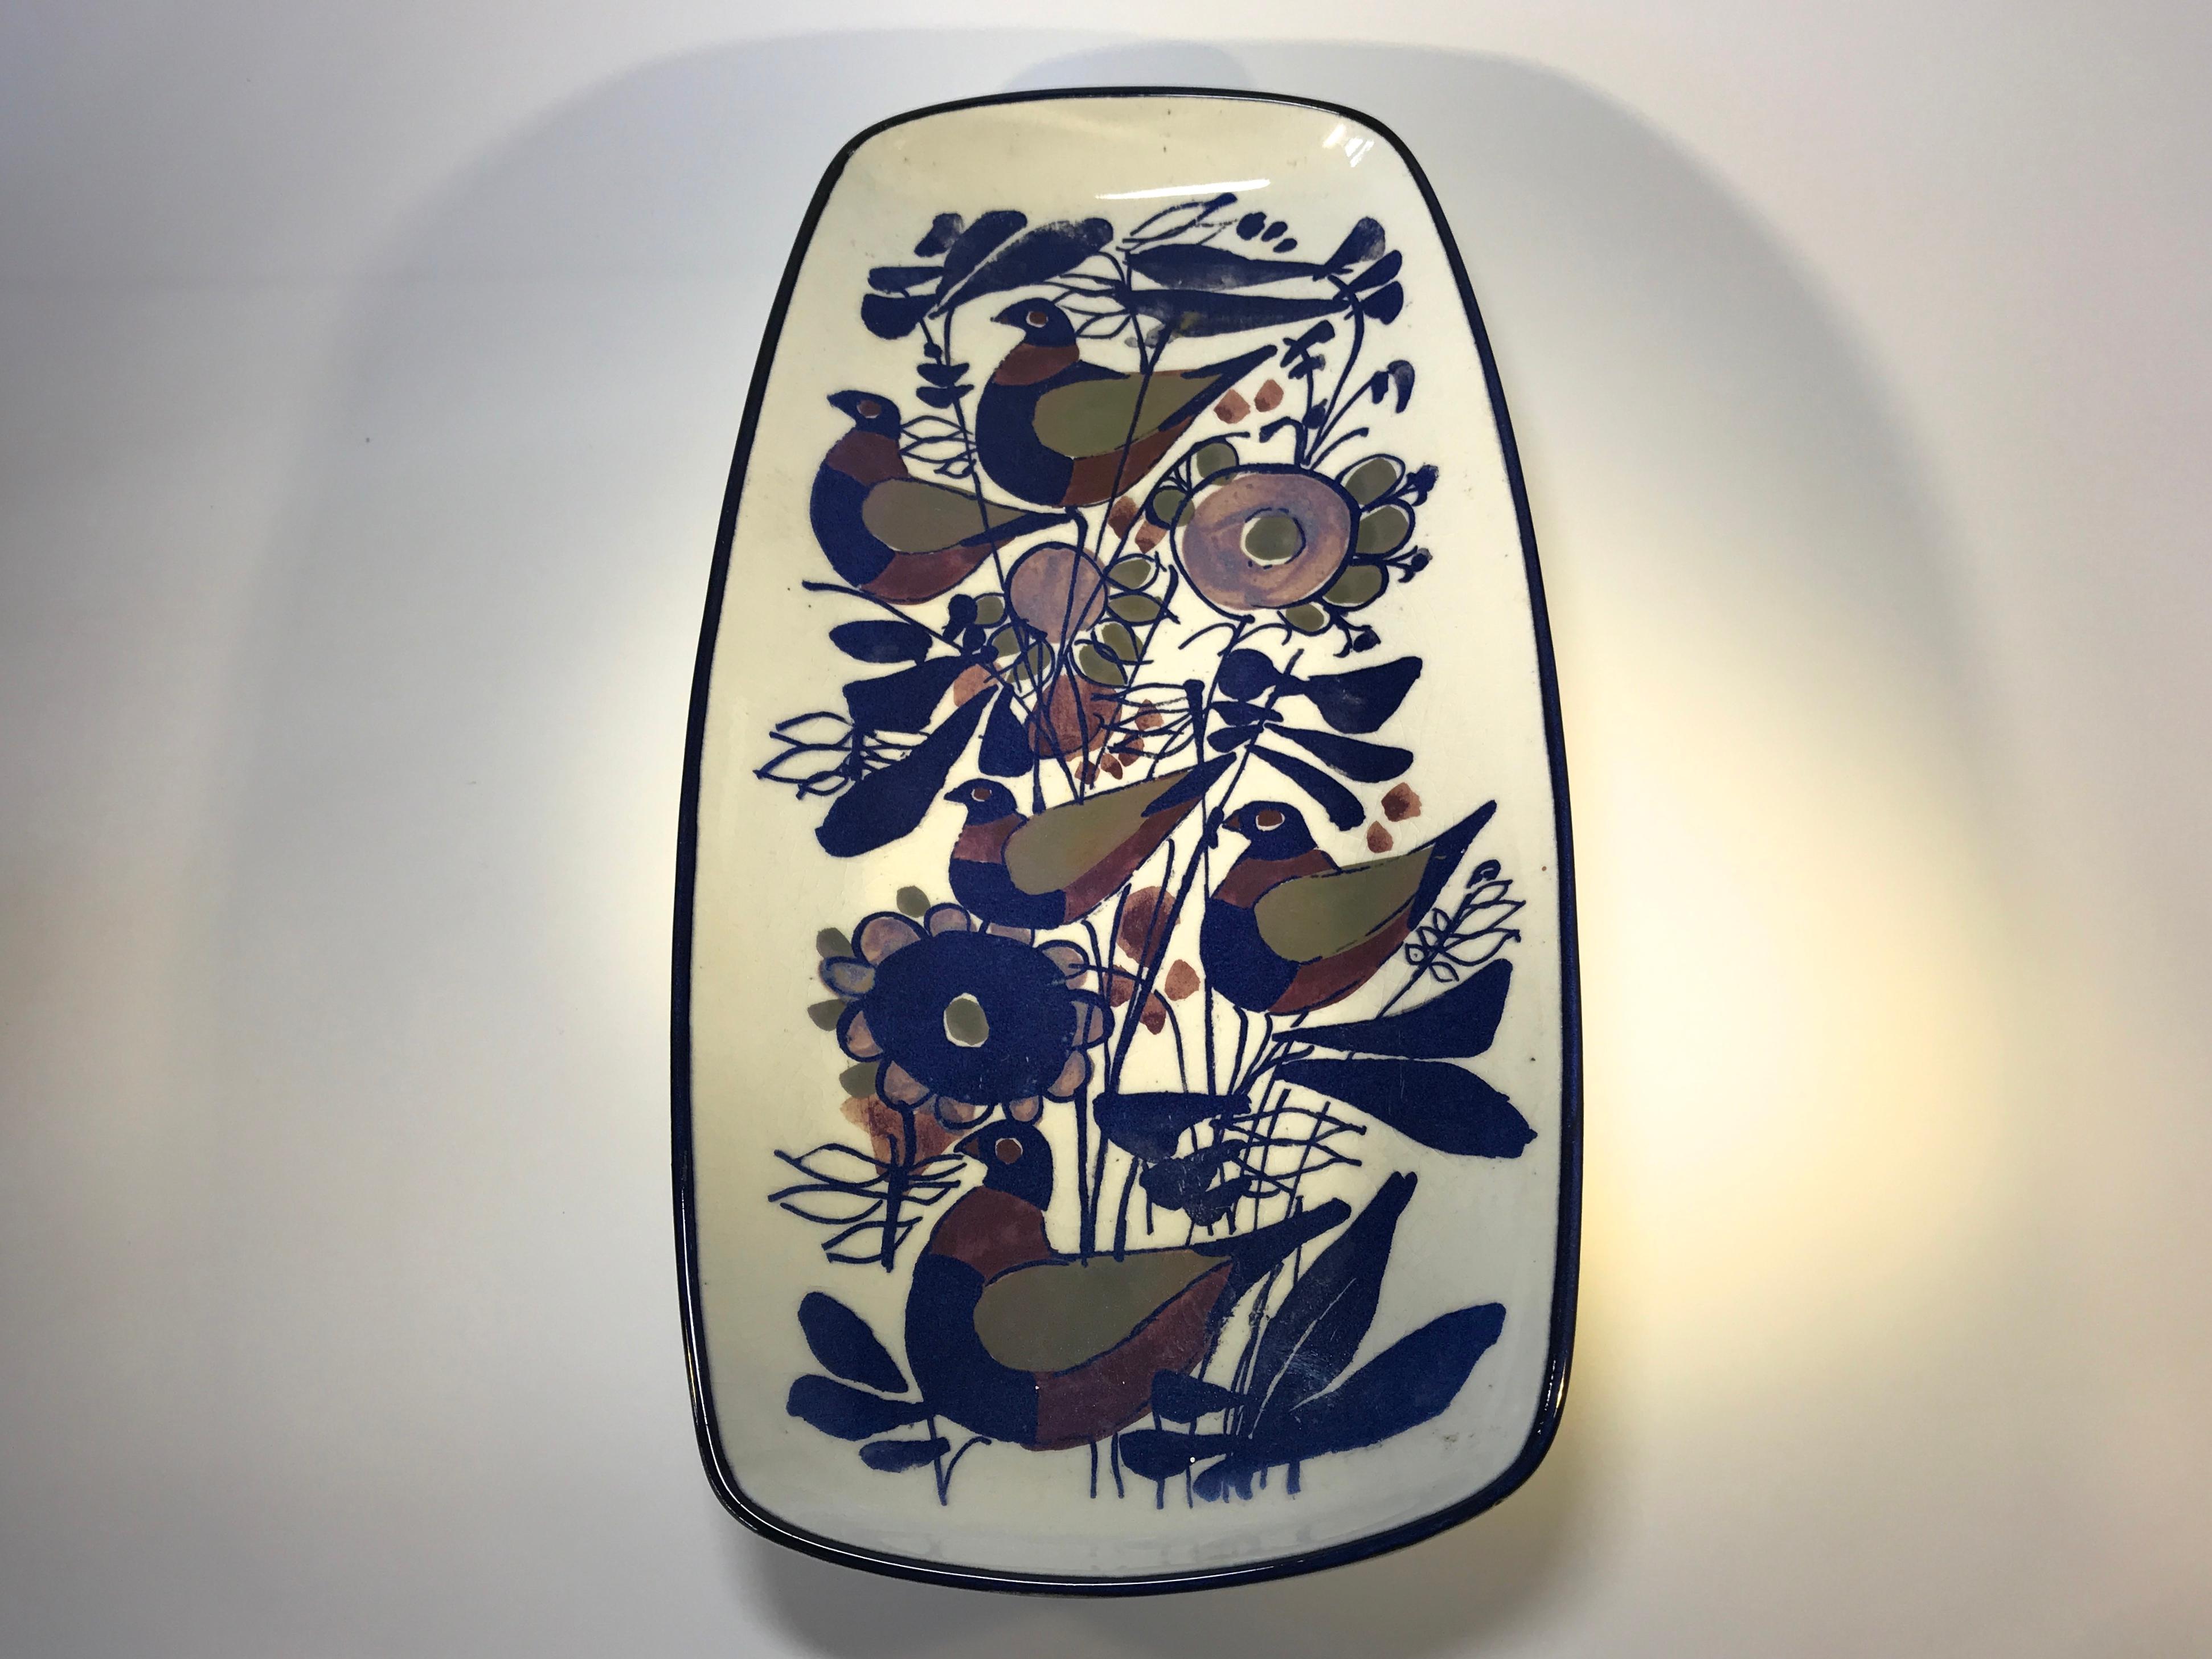 Kari Christensen for Royal Copenhagen Aluminia. Glazed large oblong ceramic dish with bird decoration. Soft hues of blue and maroon from the Tenera series, circa 1965
Signed and numbered 2744 on reverse
In good condition. Light crazing on front